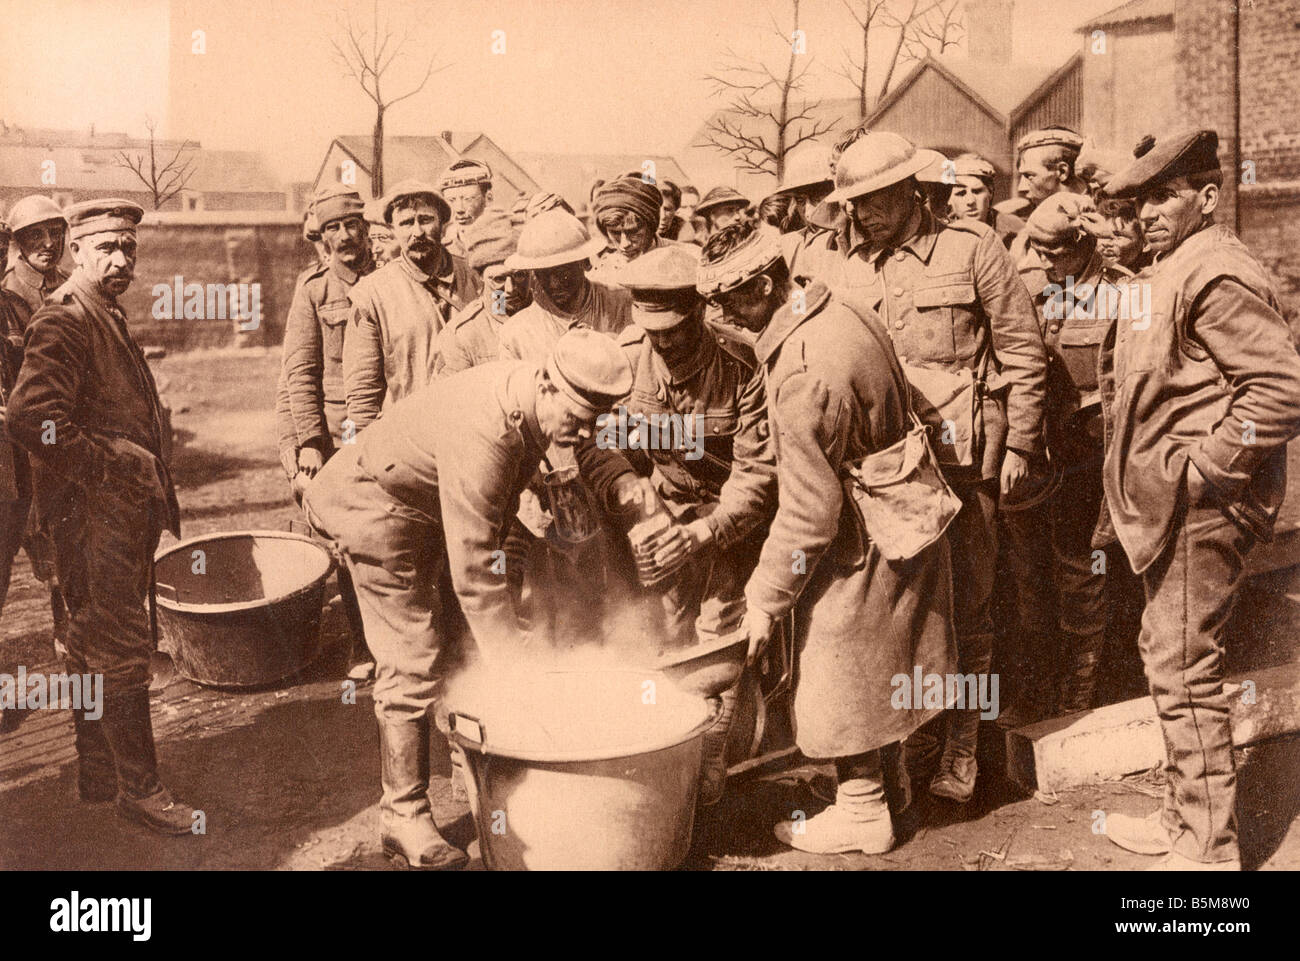 2 G55 K1 1918 10 E English Prisoners of War Photo 1918 History World War I 1914 18 Prisoners of War The Great Battle in the West Stock Photo